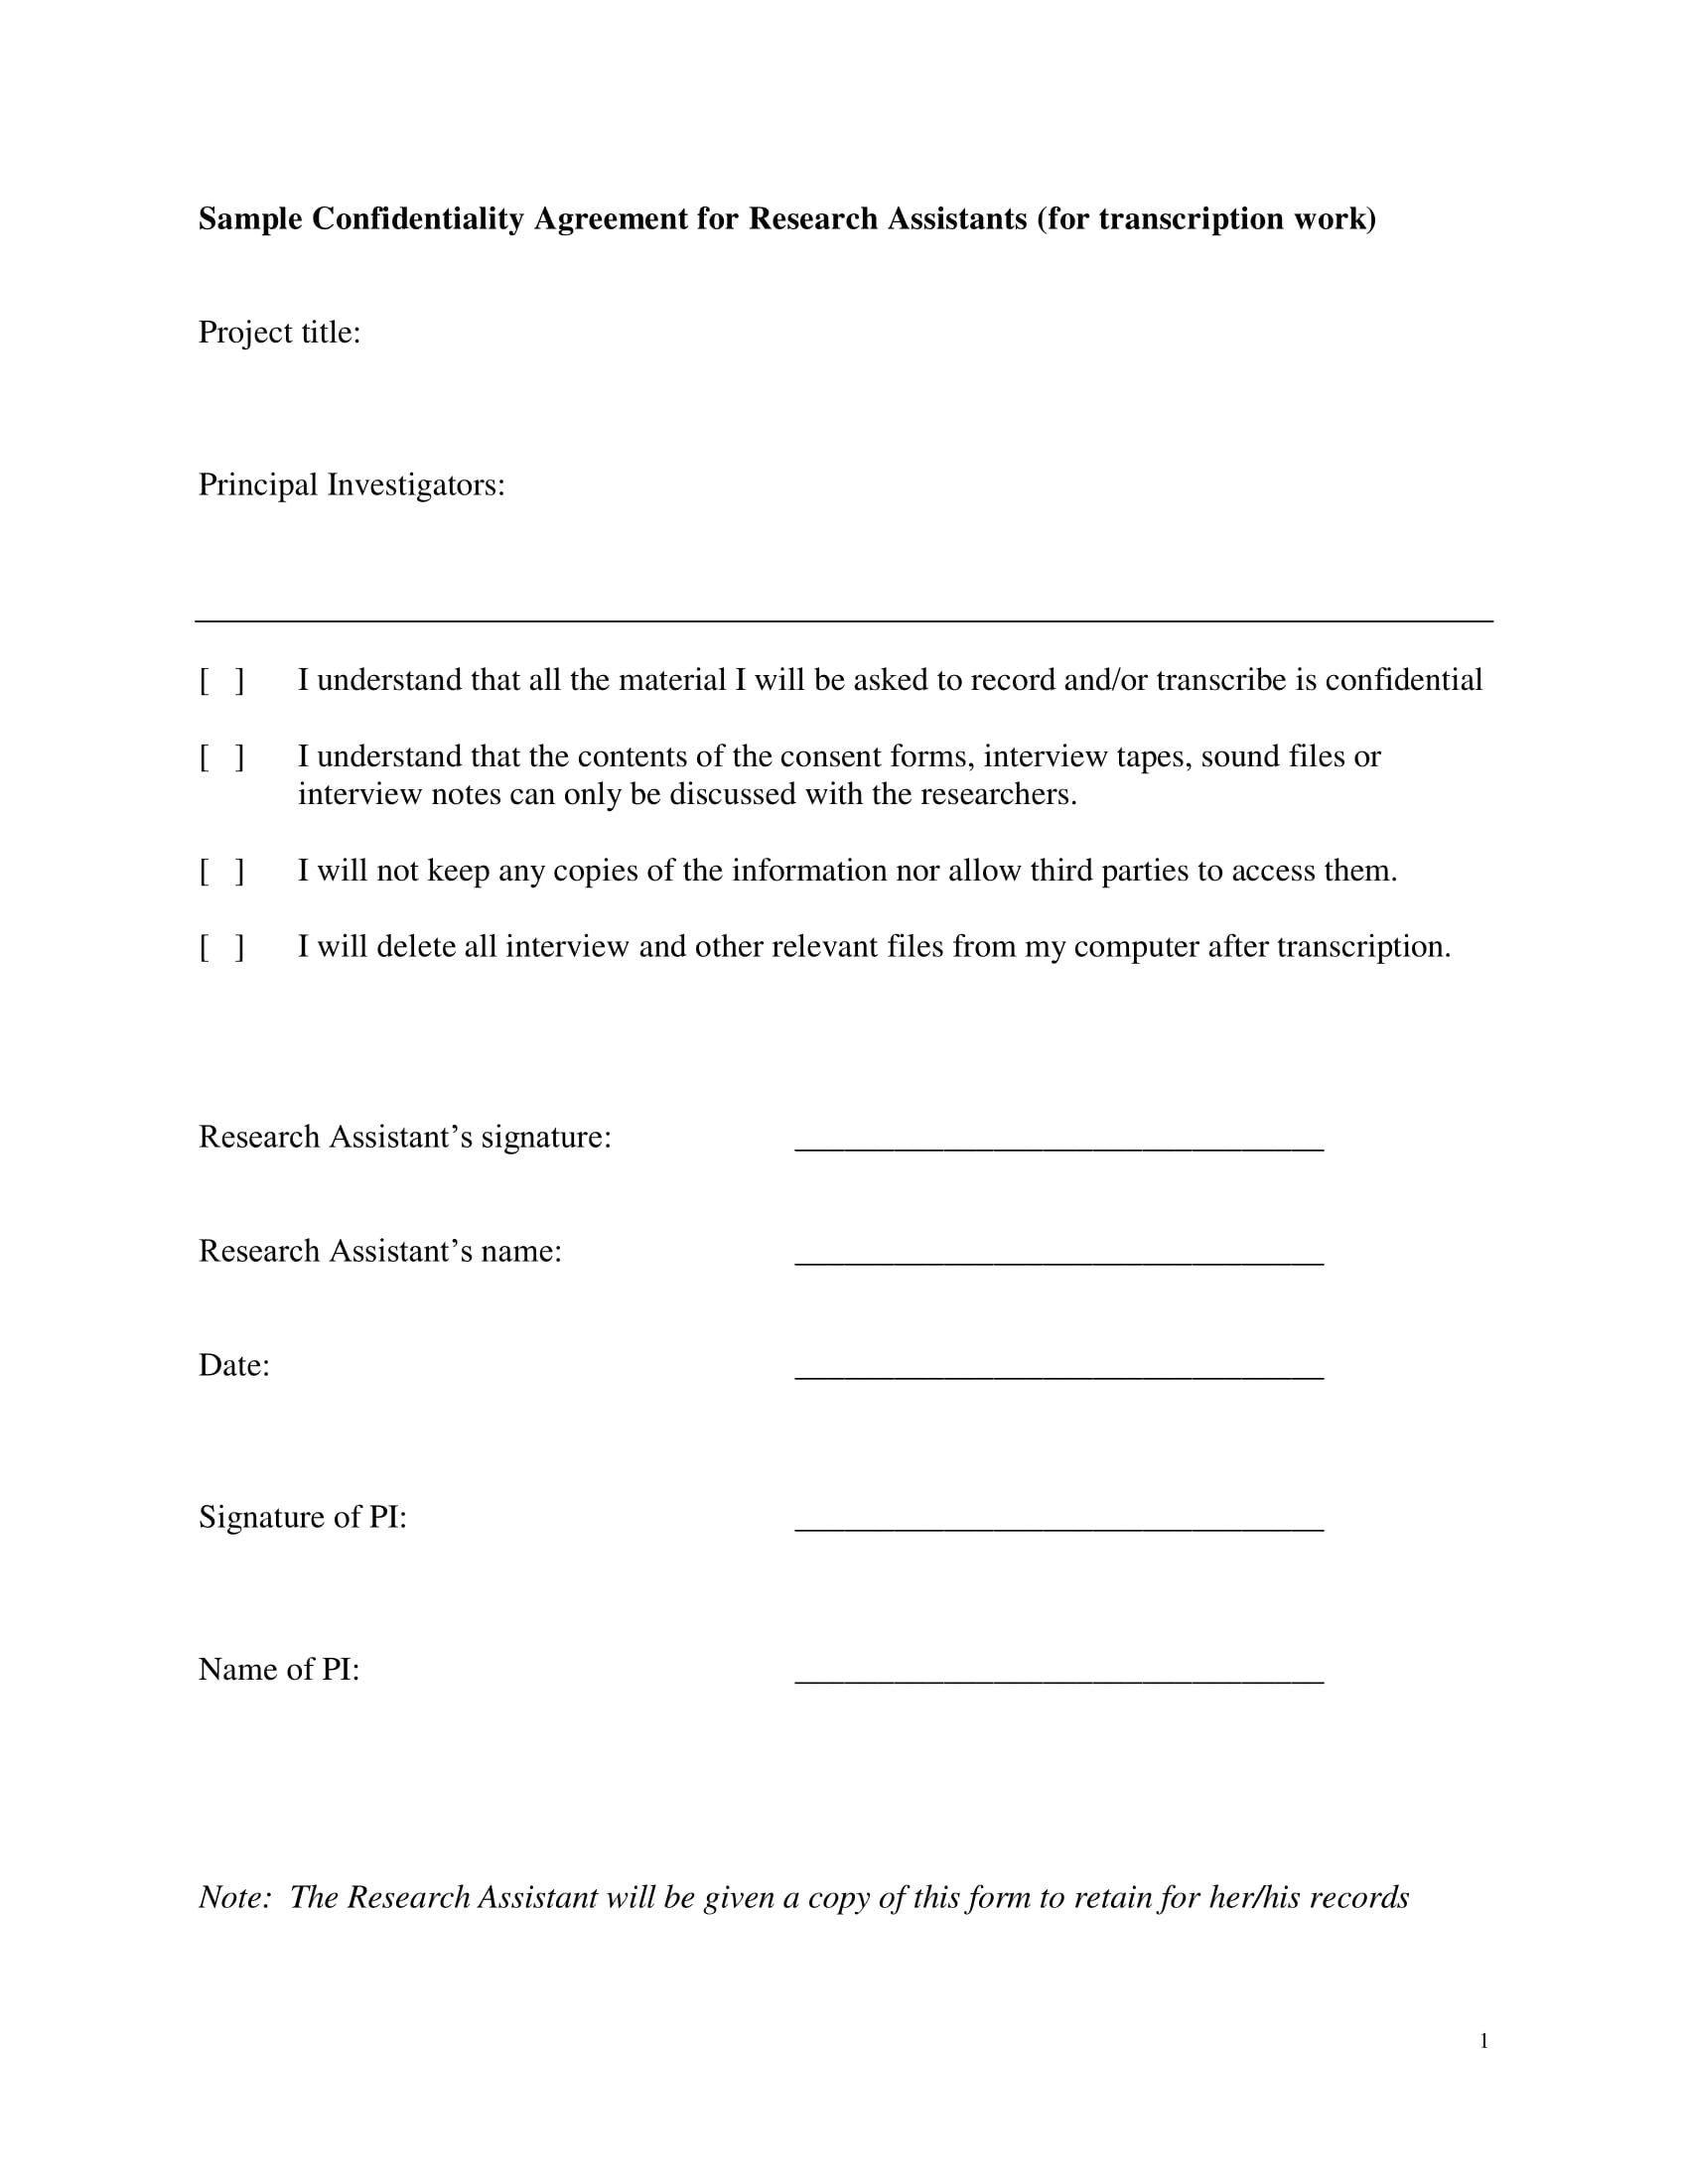 research assistant confidentiality agreement form 1